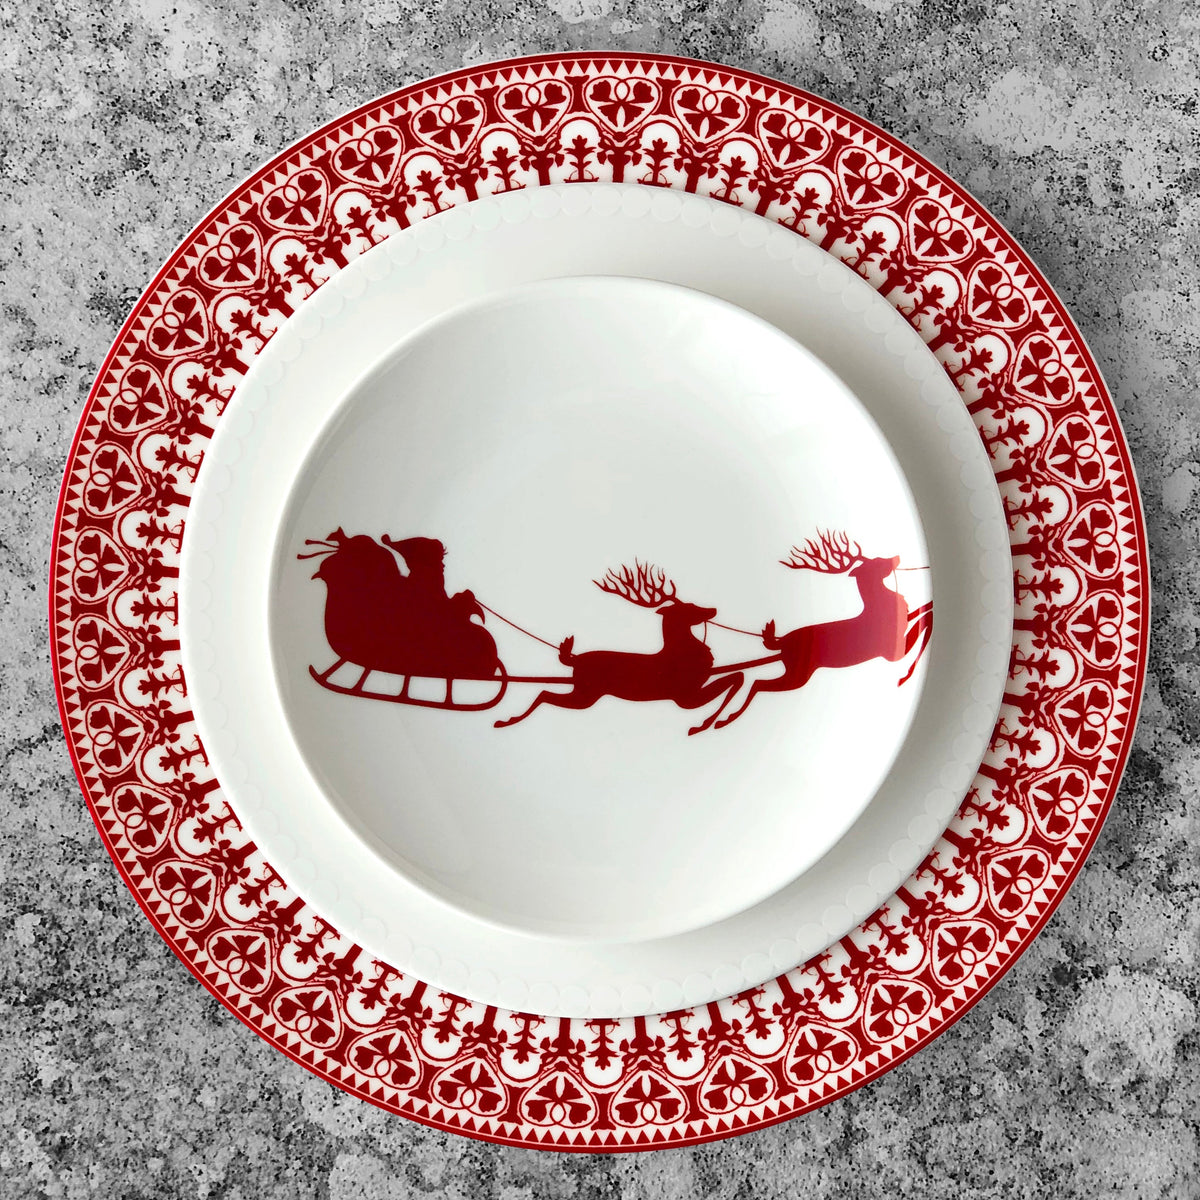 A Casablanca Crimson Rimmed Dinner Plate by Caskata Artisanal Home featuring a sleigh and reindeer on it, with a touch of festive color in crimson. Made from premium porcelain dinnerware.